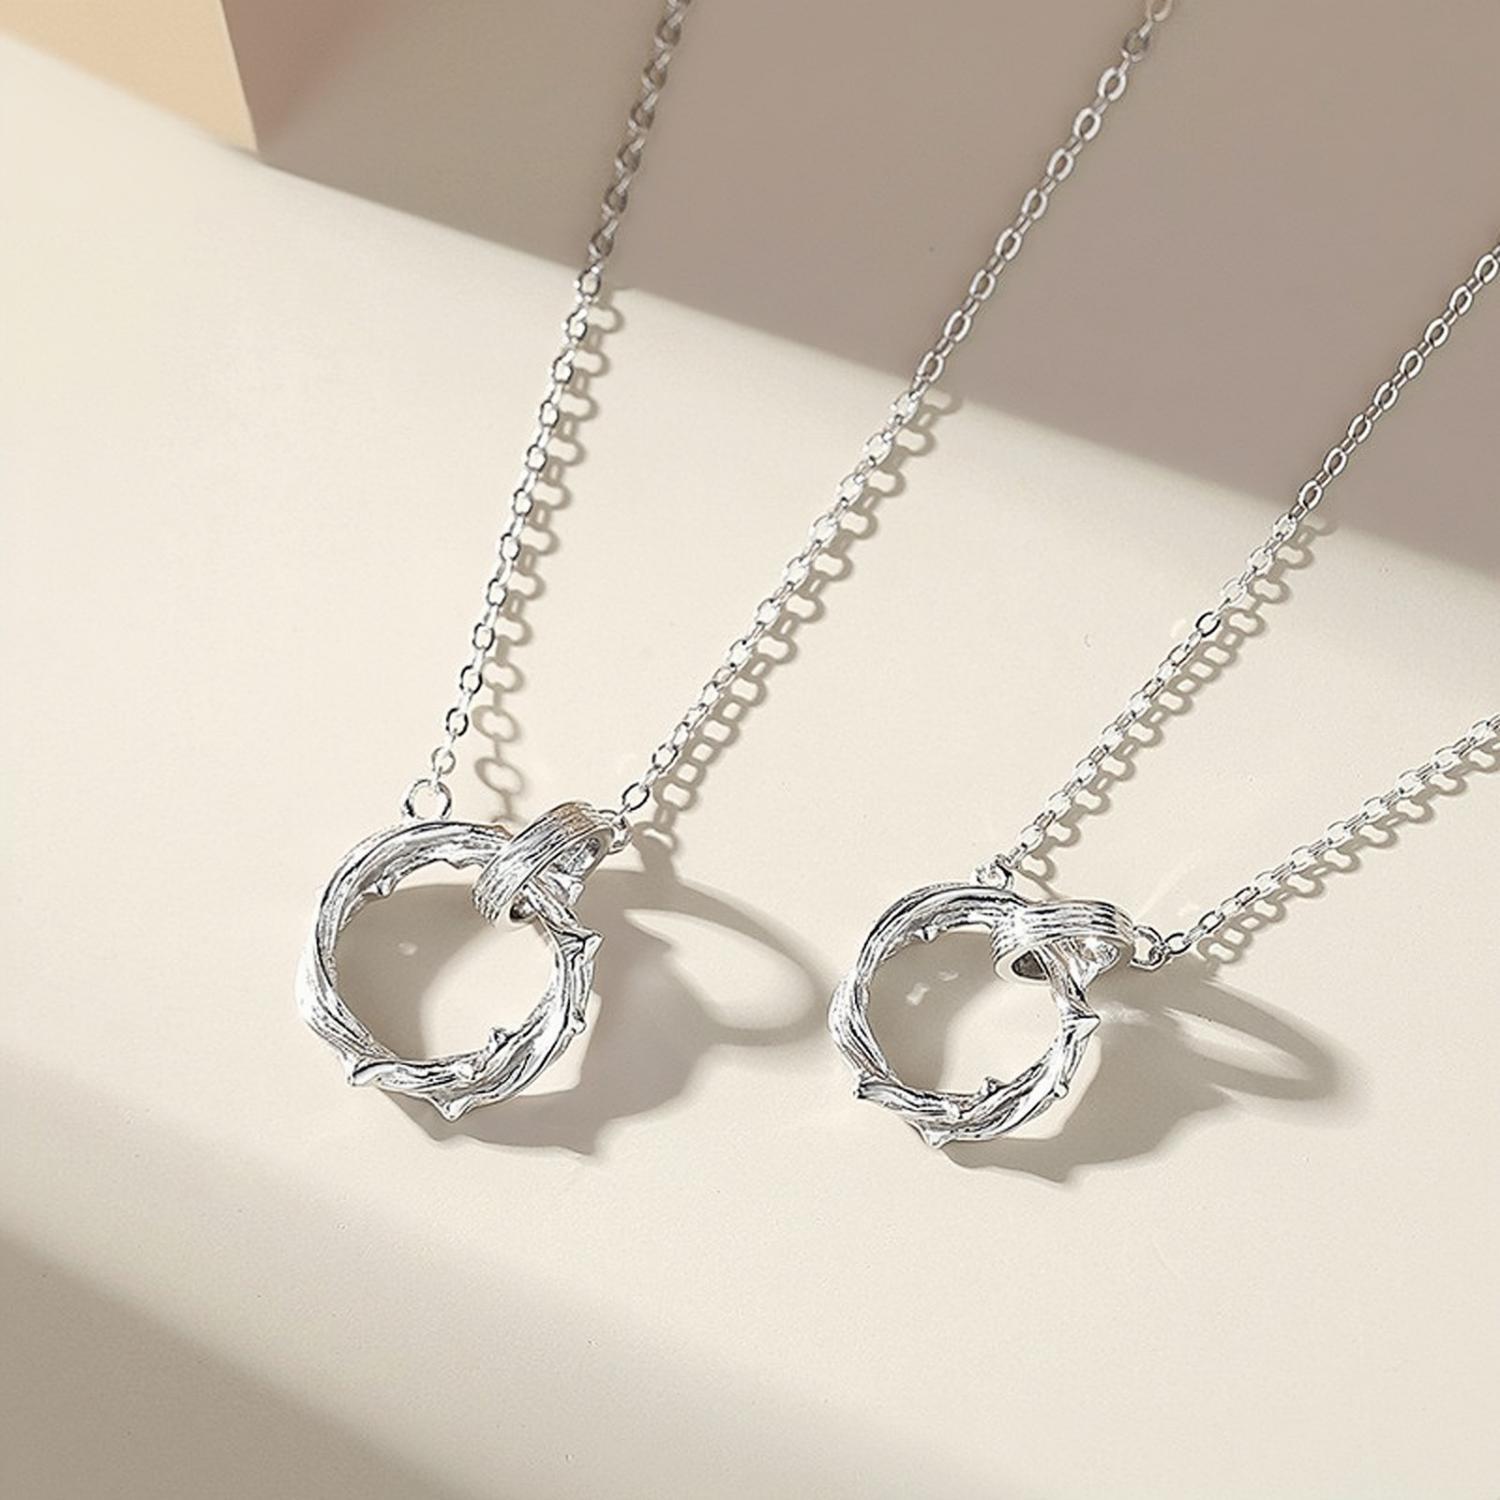 Unique Thorns Knot Matching Necklace For Couples In Sterling Silver - CoupleSets